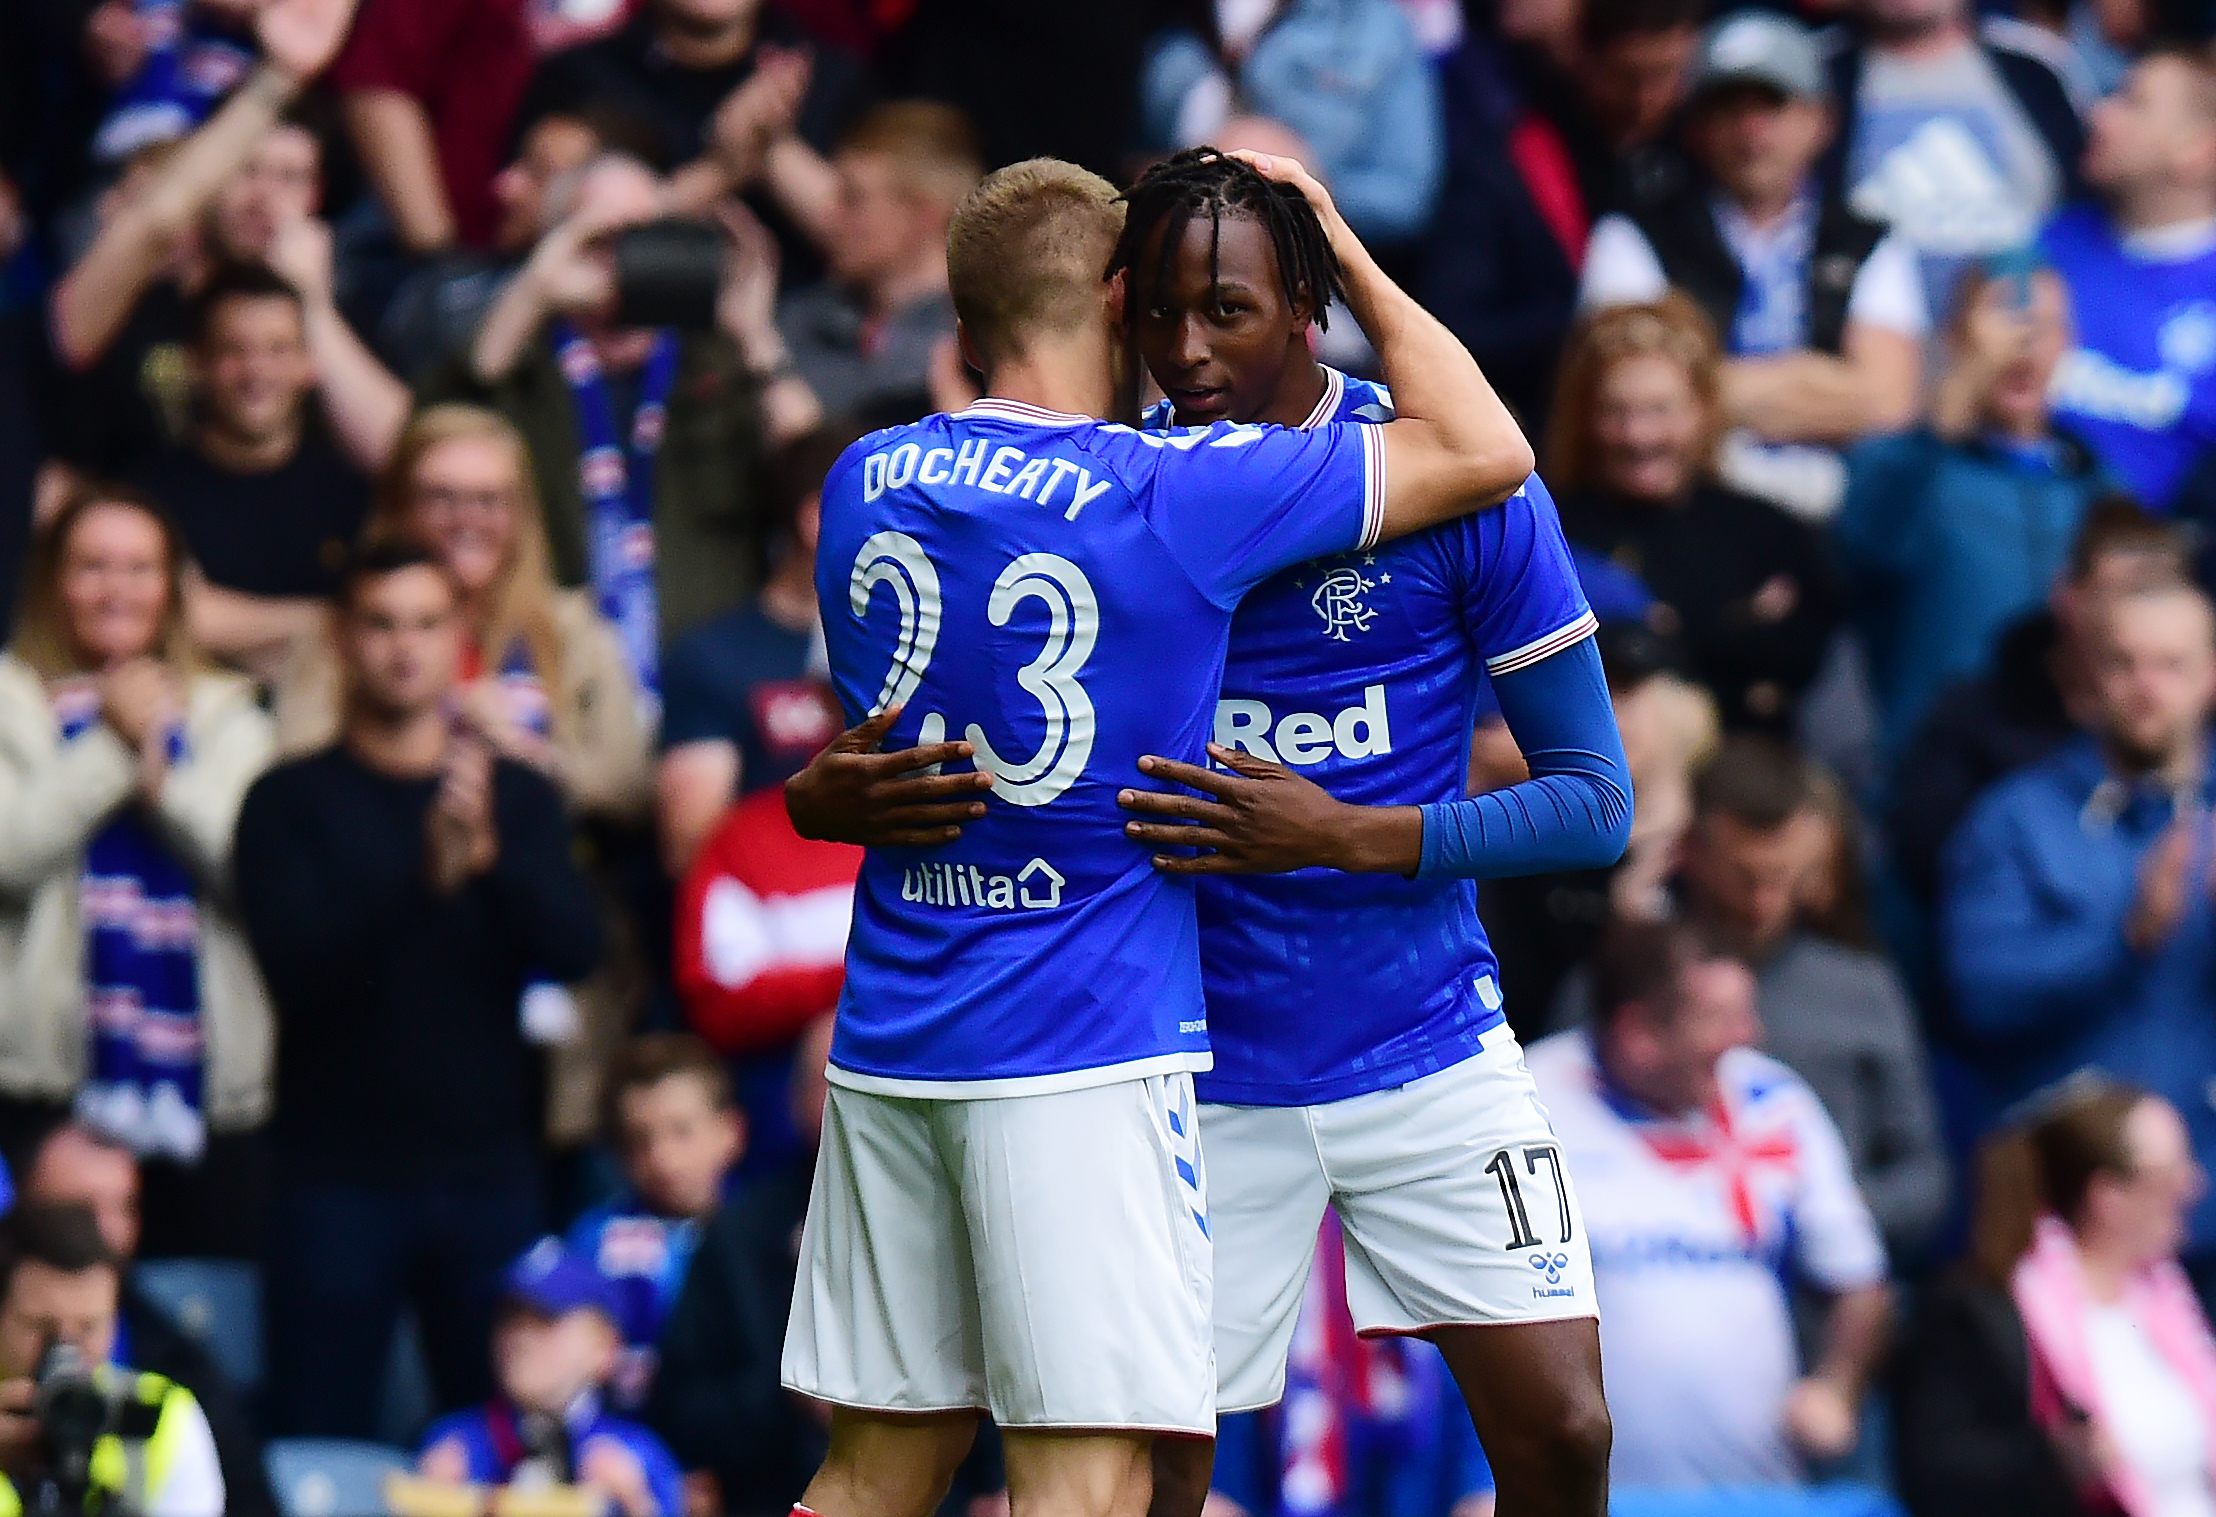 GLASGOW, SCOTLAND - JULY 18: Joseph Aribo of Rangers celebrates scoring the opening goal of the game with Greg Docherty of Rangers during the UEFA Europa League First Qualifying round 2nd Leg match between Rangers and St Joseph at Ibrox Stadium on July 18, 2019 in Glasgow, Scotland.